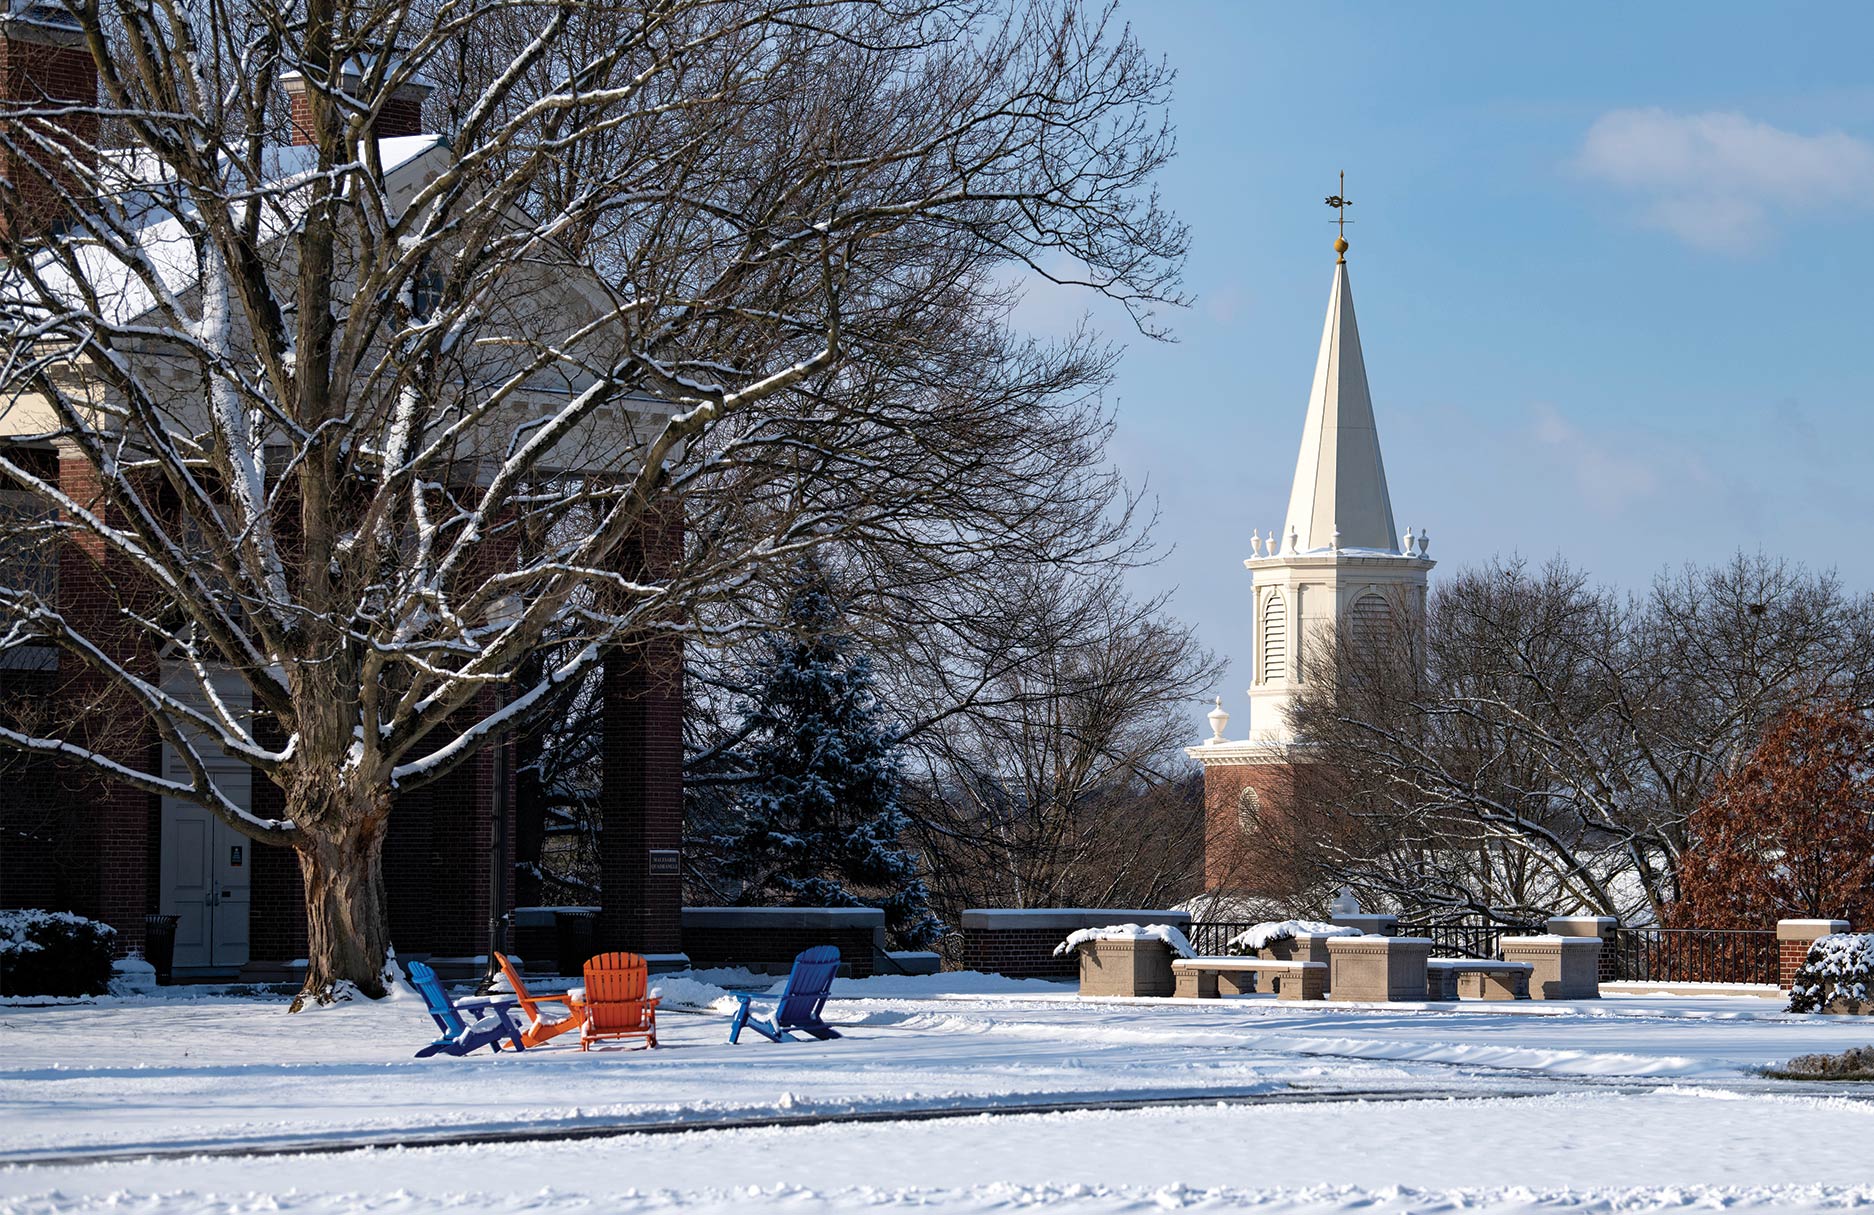 The winter snow blanketing the campus of Bucknell with bright orange and blue chairs in focus and, in the background, a large, cream-colored steeple pointing towards the cloudless sky.